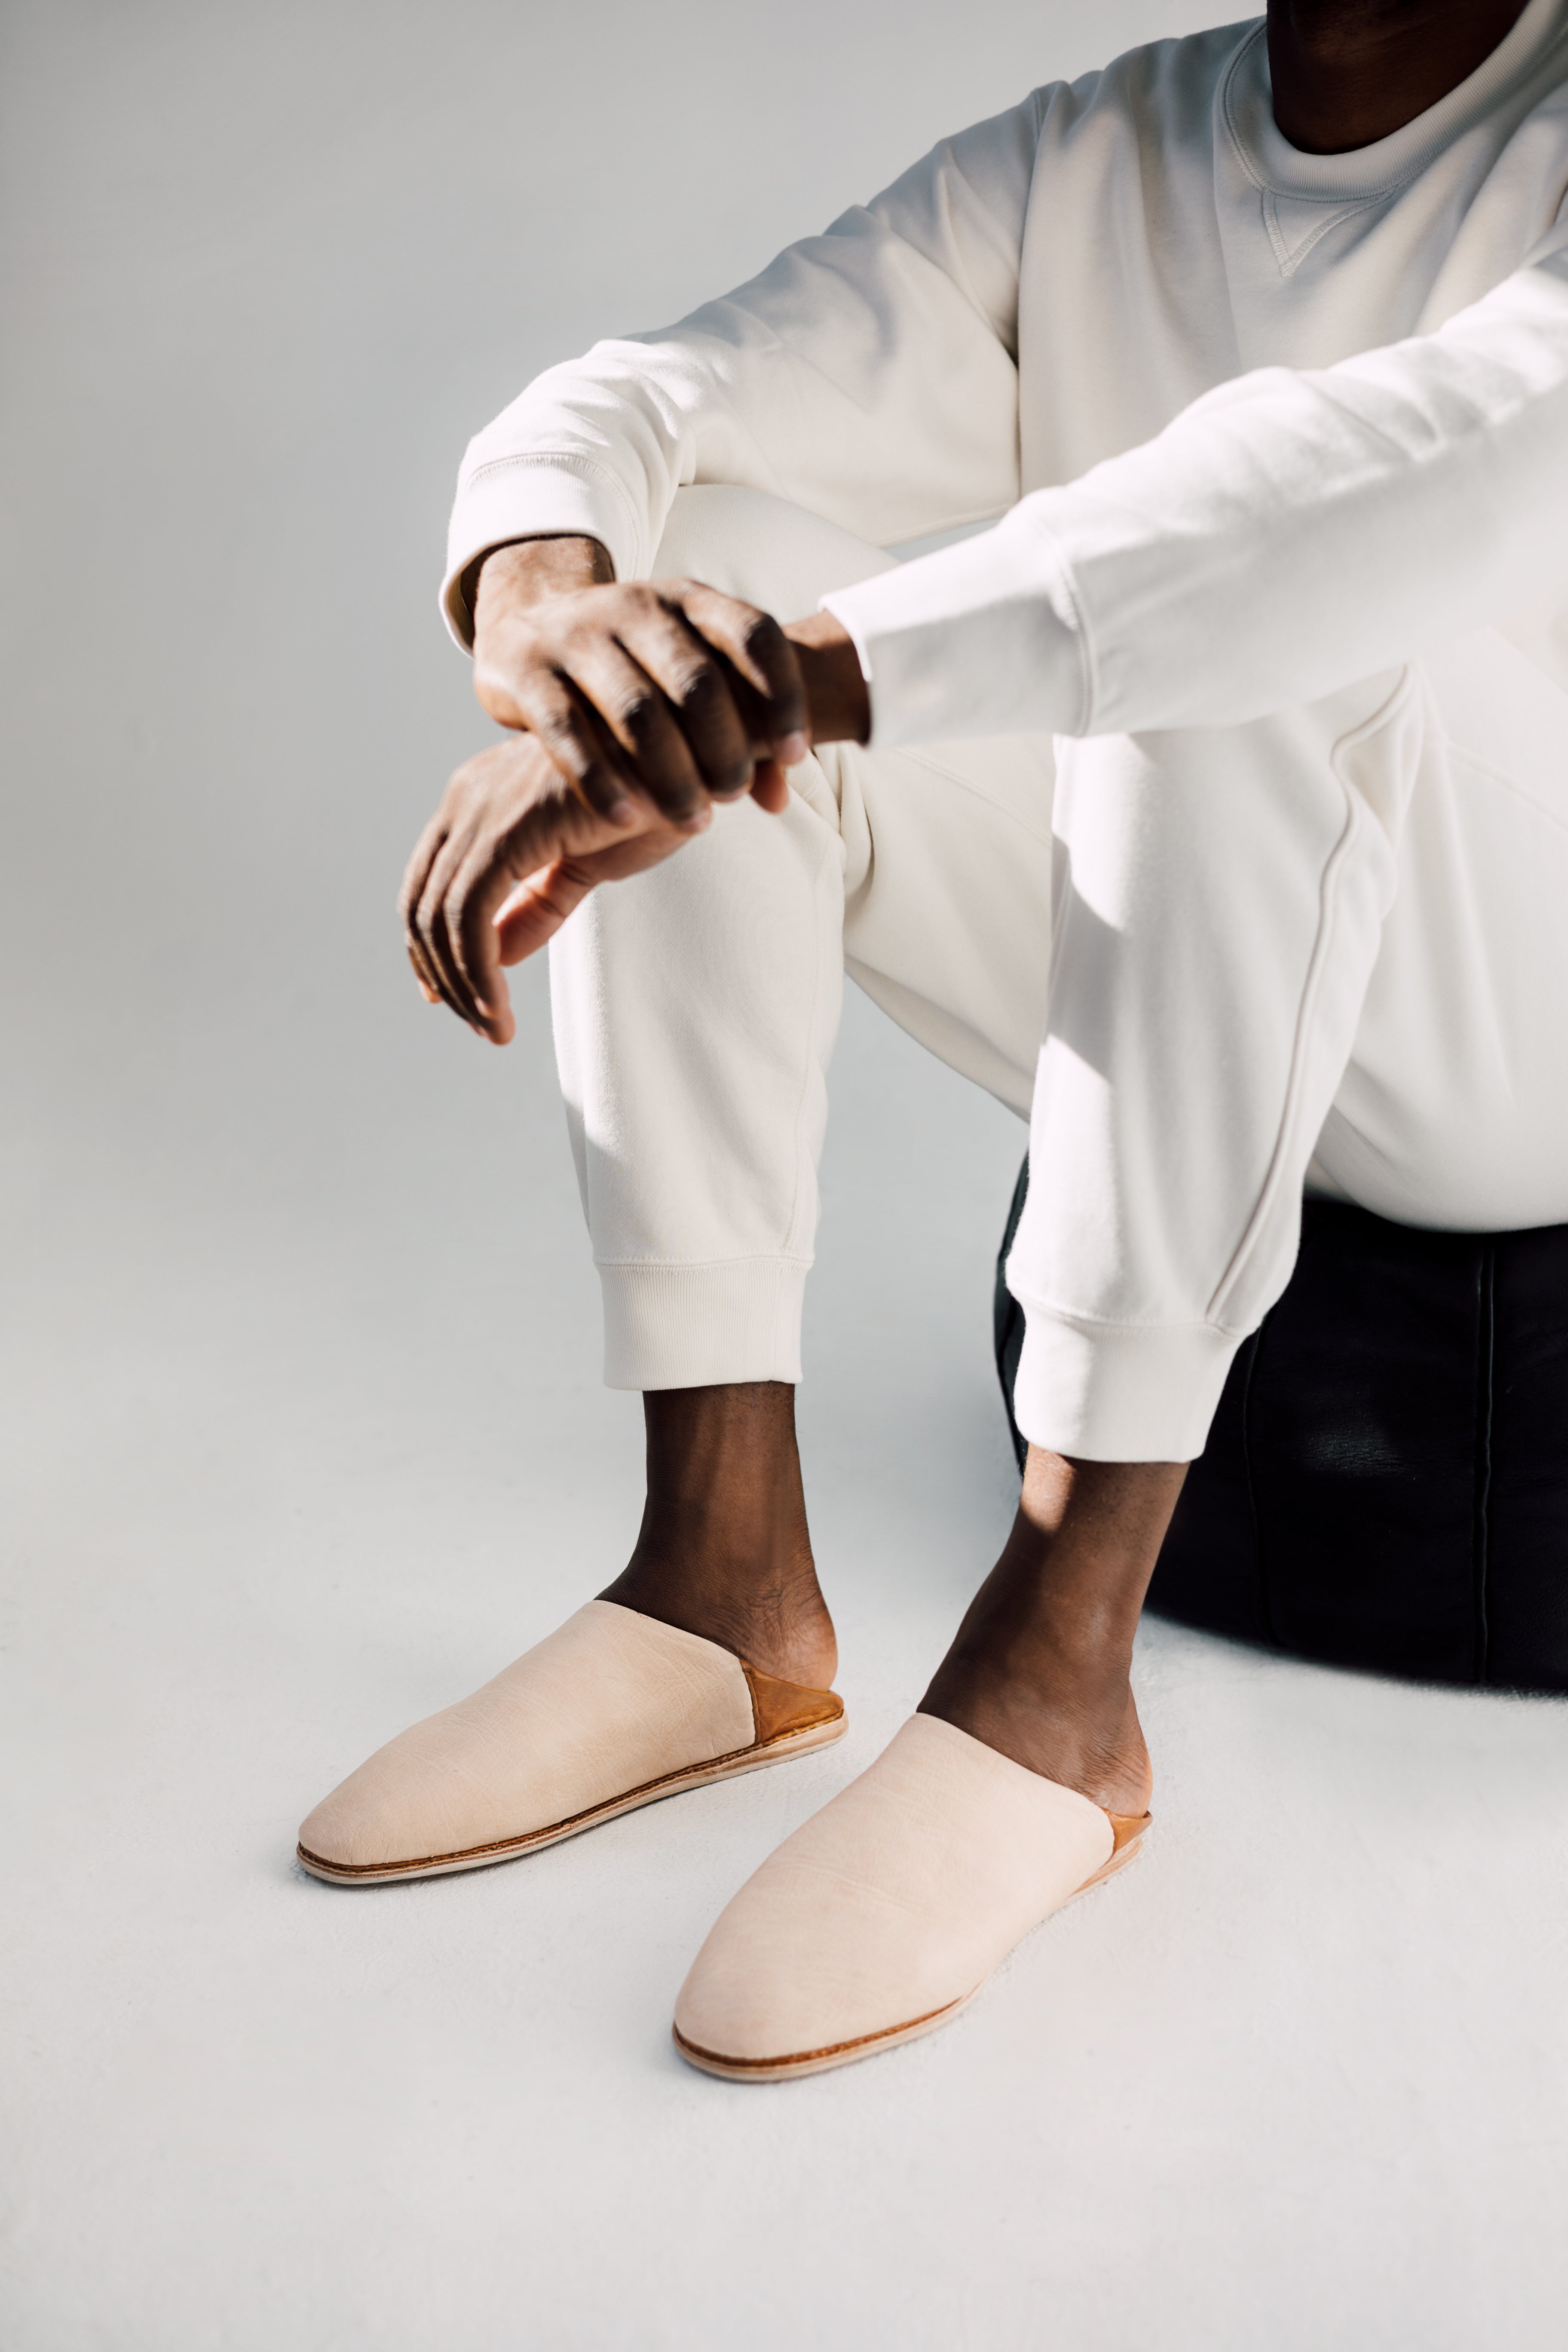 UNISEX HOUSE SHOES IN NATURAL VACHETTA LEATHER